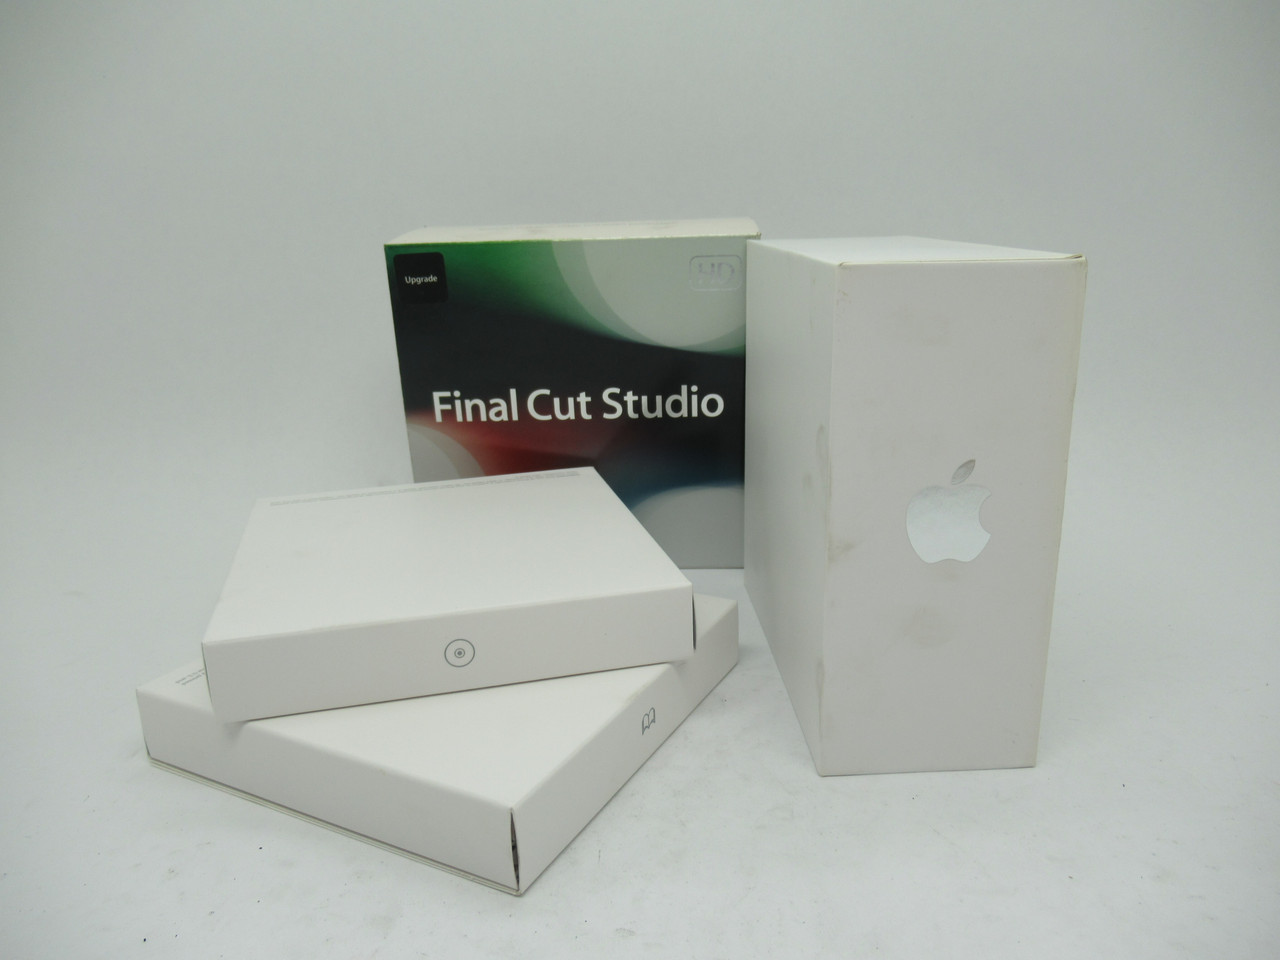 Apple MB642Z/A Final Cut Studio Video Editing Software UNKNOWN CONDITION USED